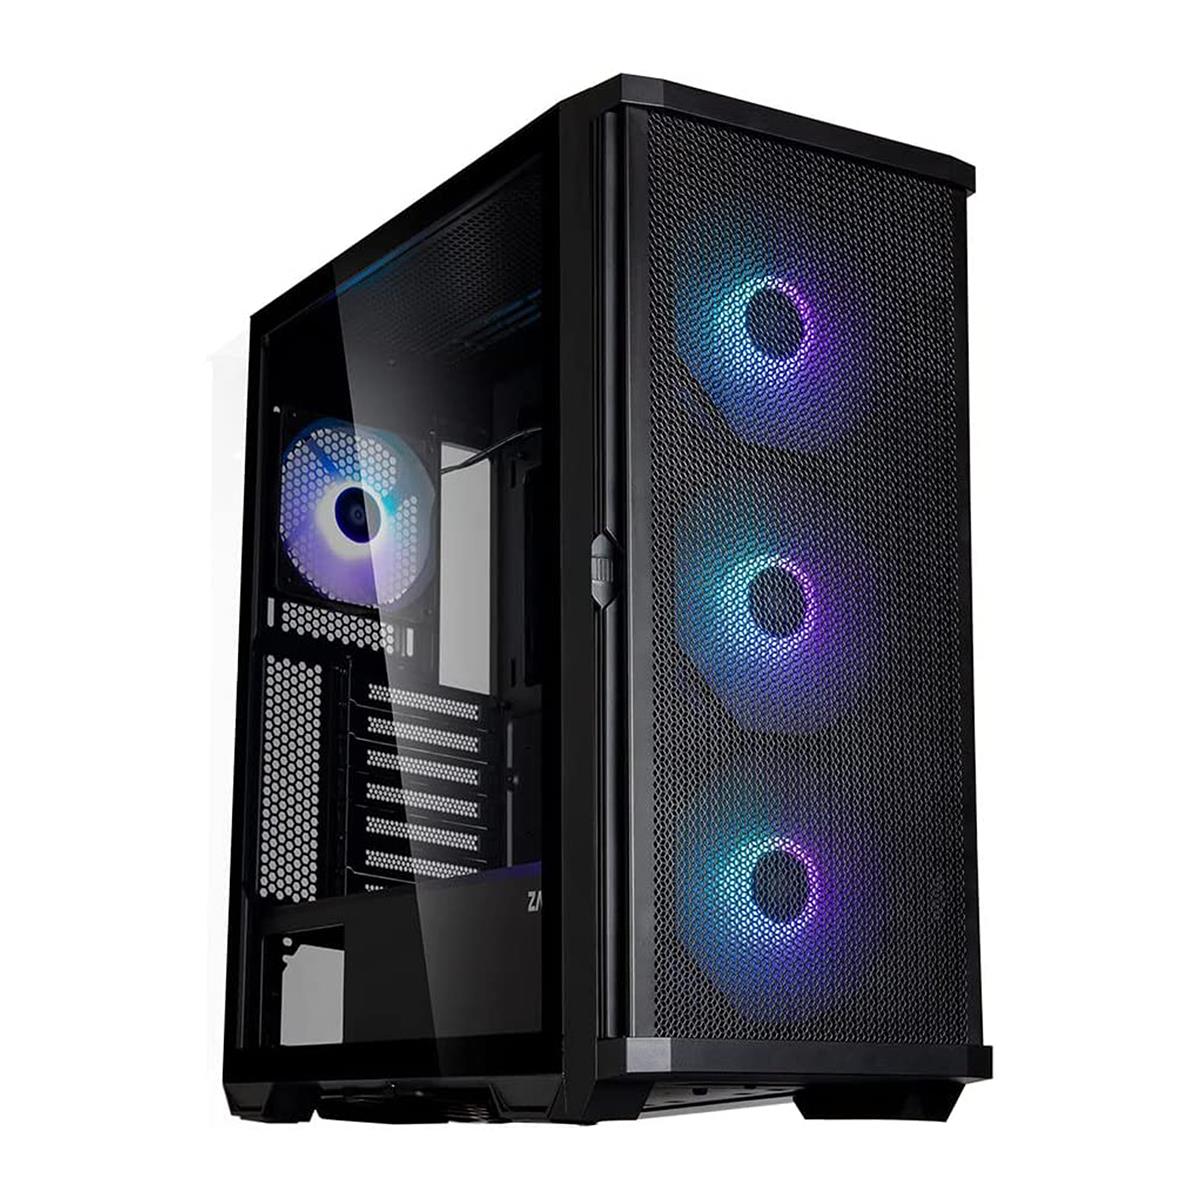 Image of Zalman Cases Z10 PLUS ARGB ATX Mid-Tower Tempered Glass Computer Case